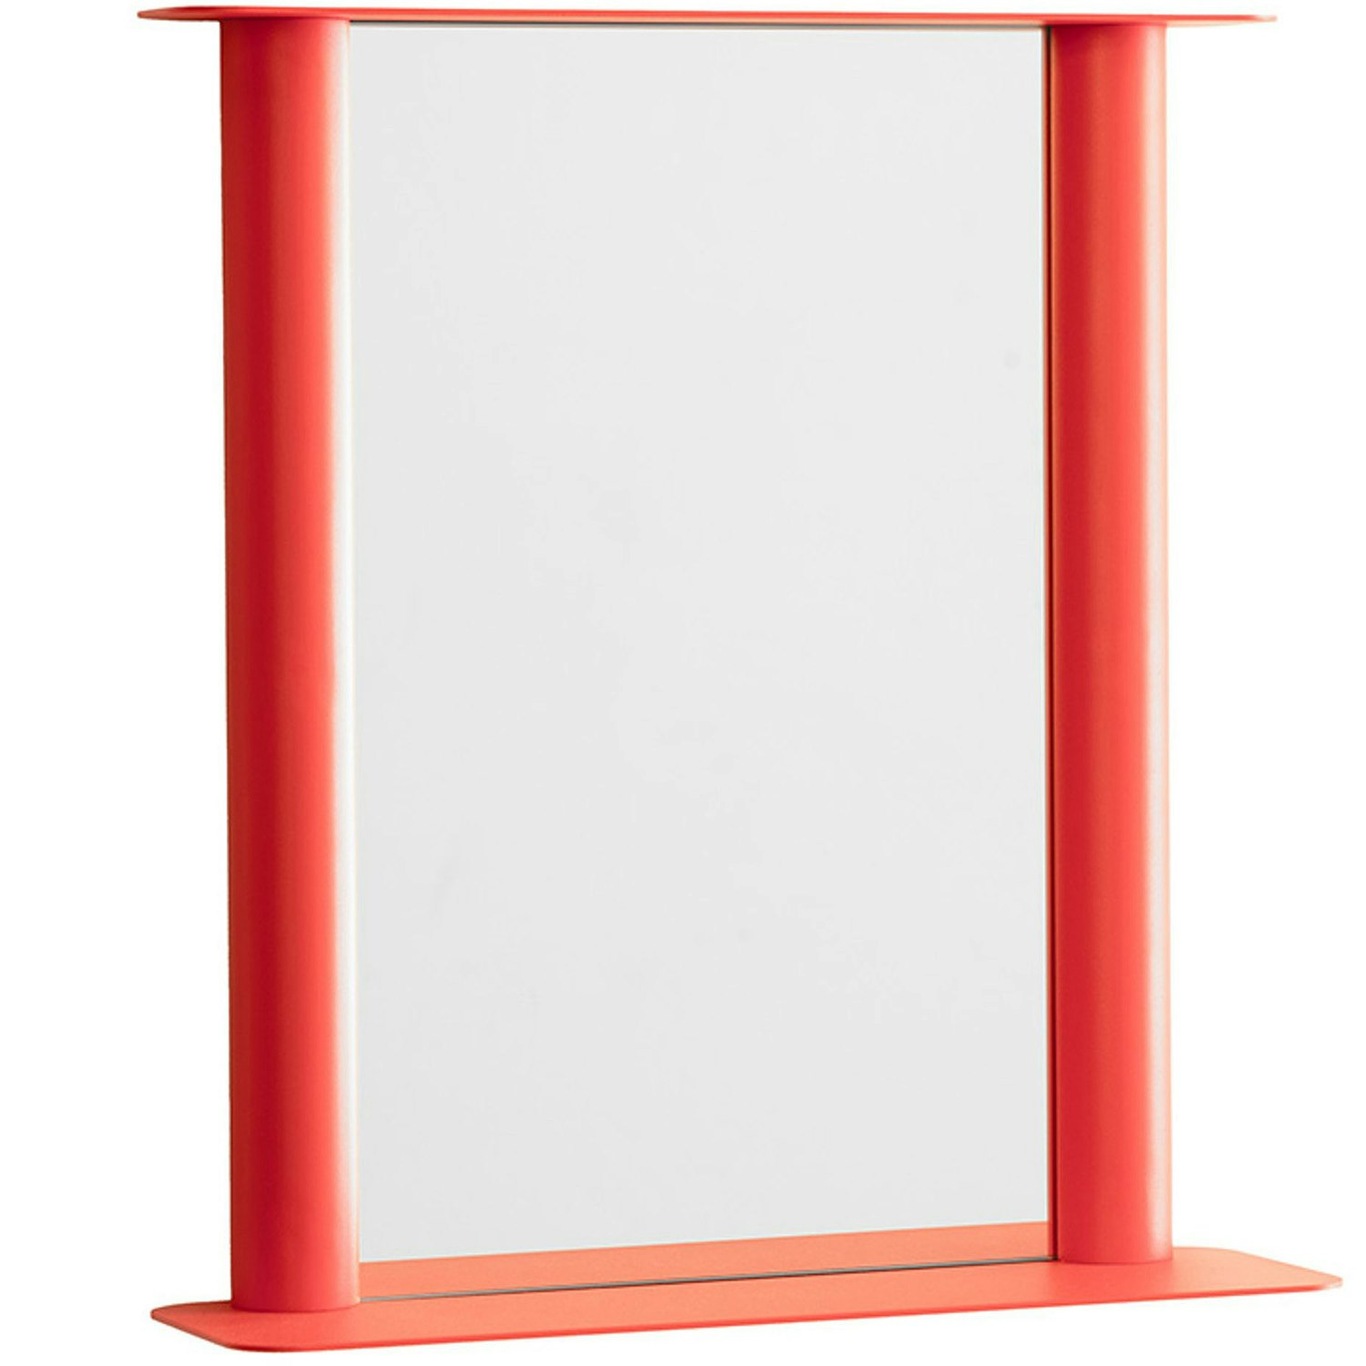 Pipeline Wall Mirror 56x60.6 cm, Red